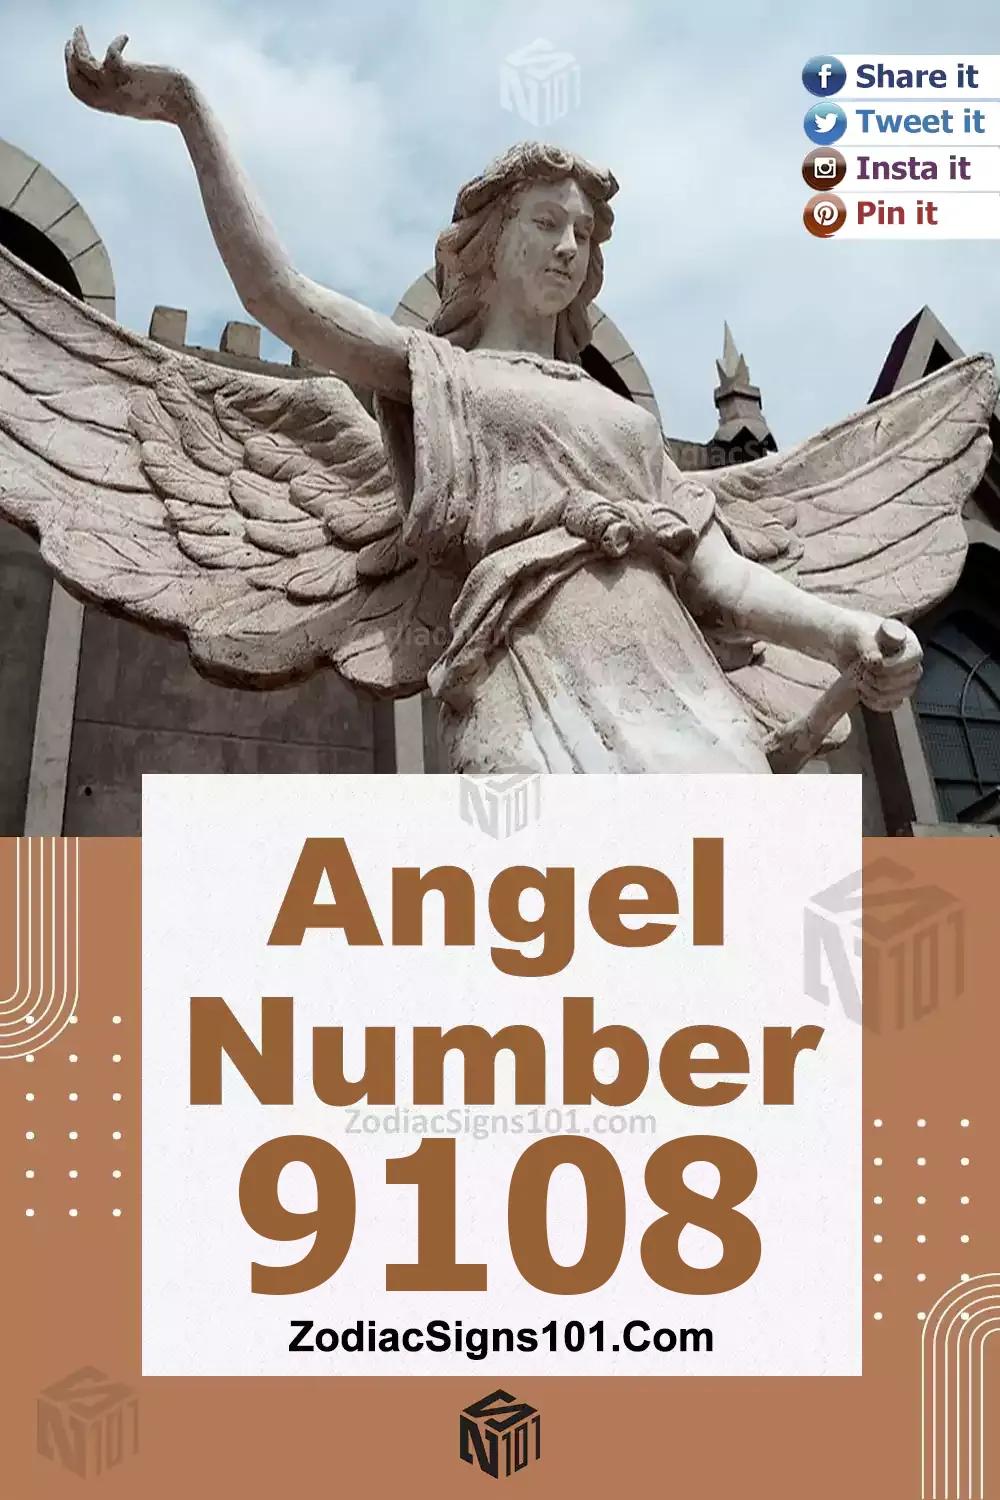 9108 Angel Number Meaning